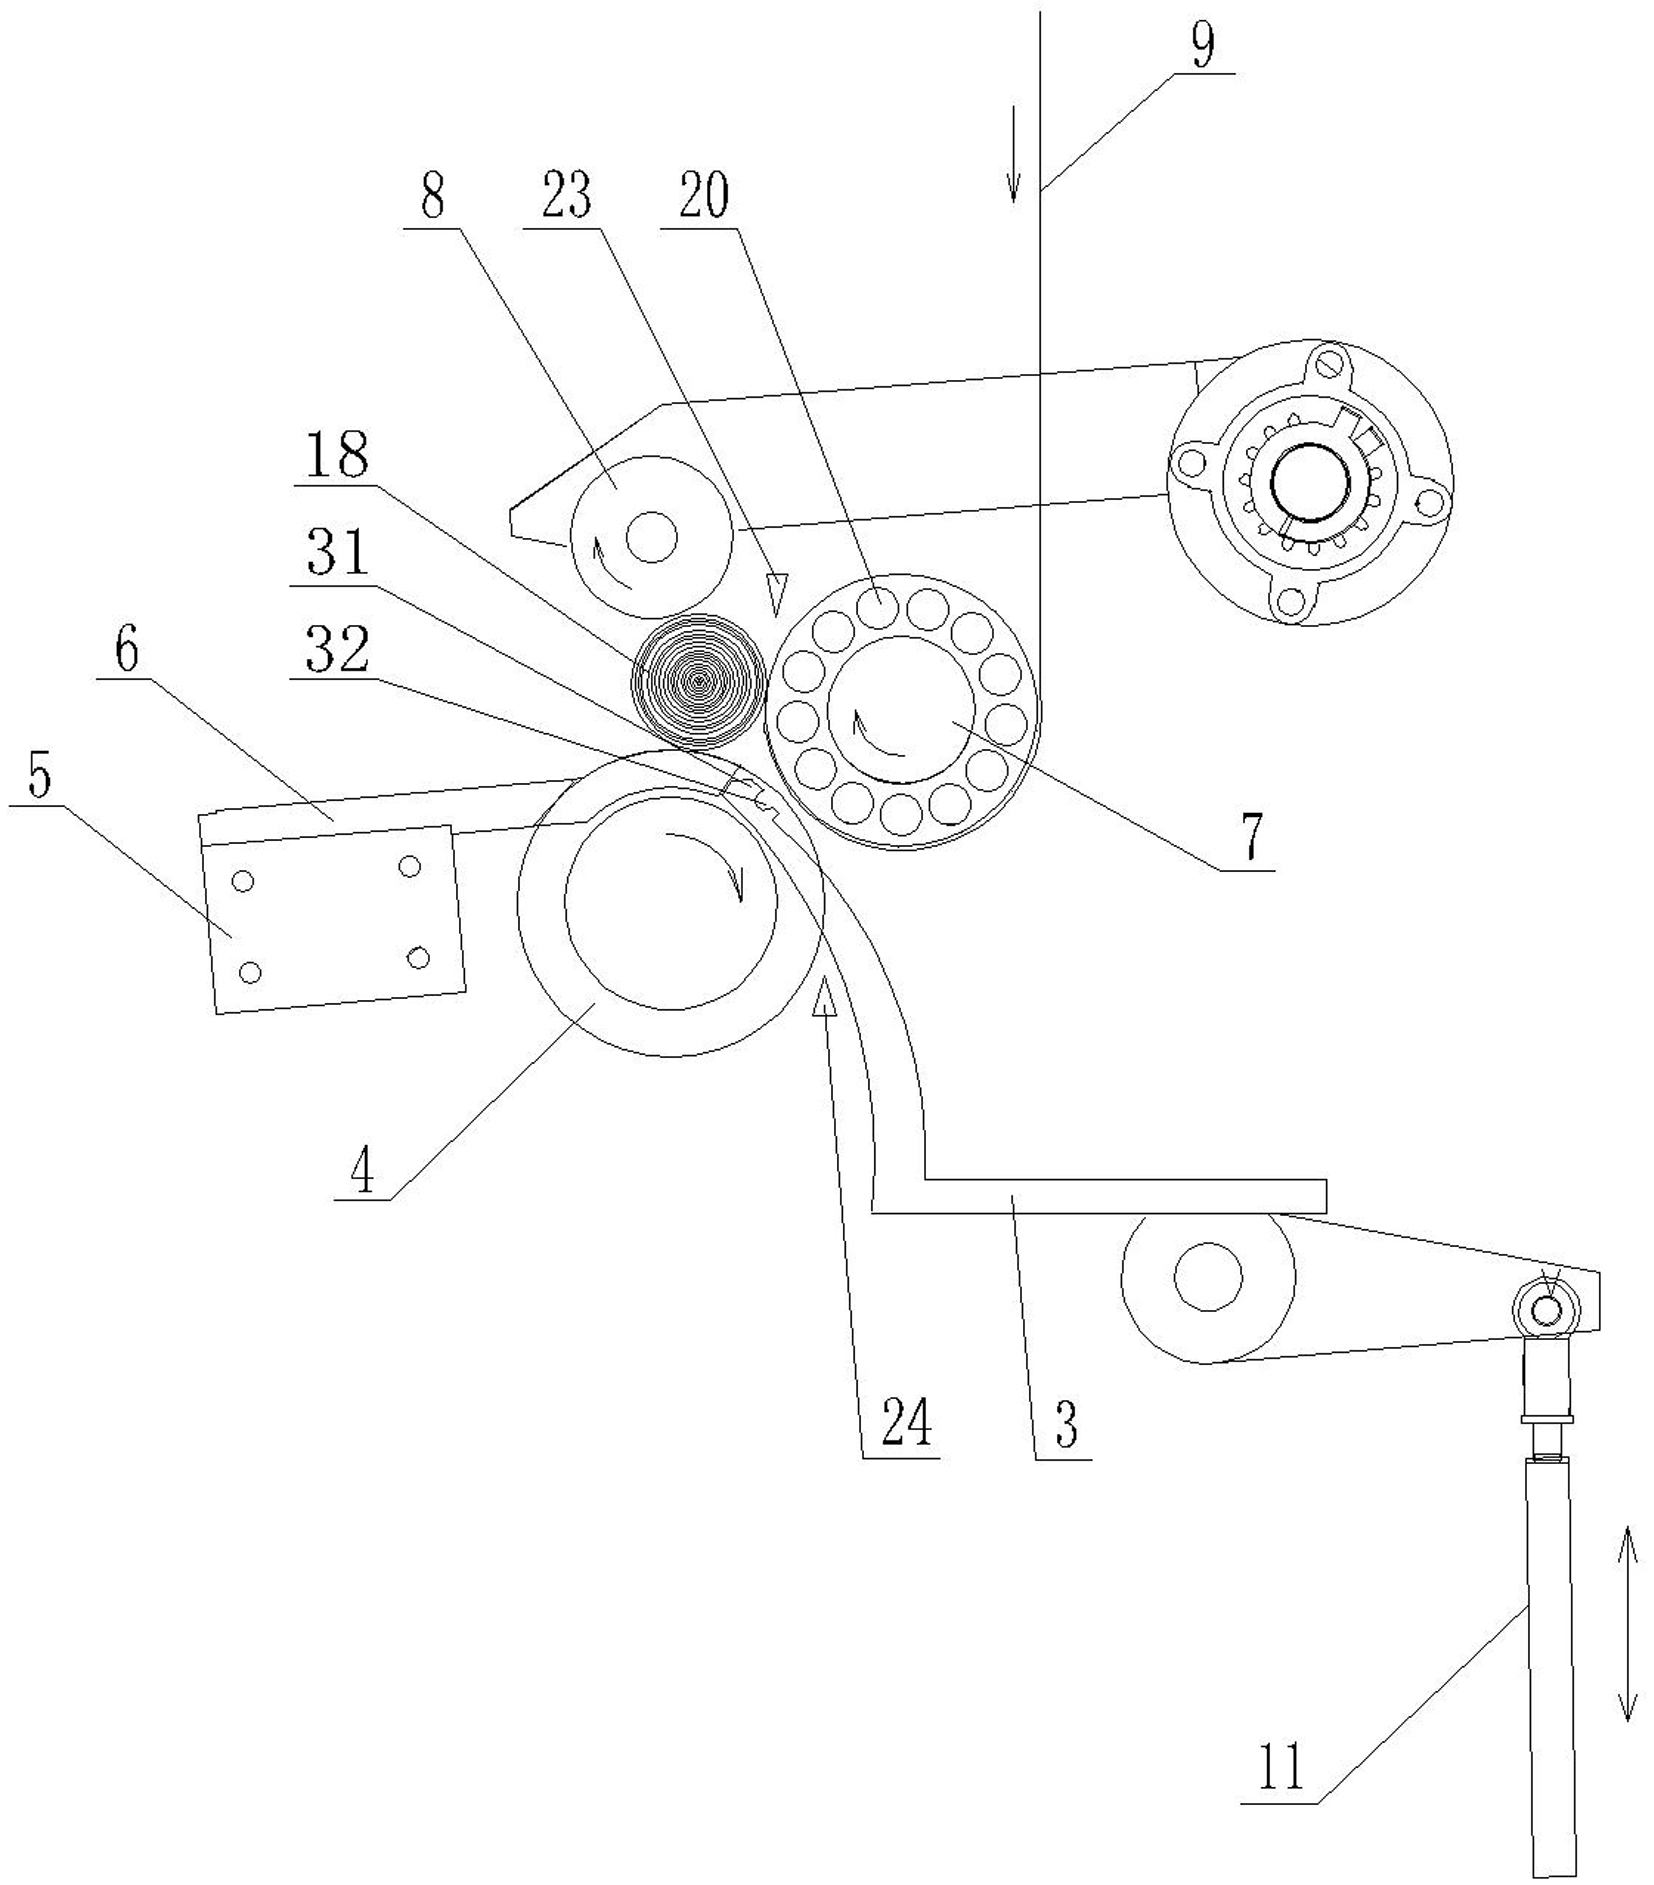 Double-purpose rewinding machine for preparing cored toilet paper and coreless toilet paper and method thereof